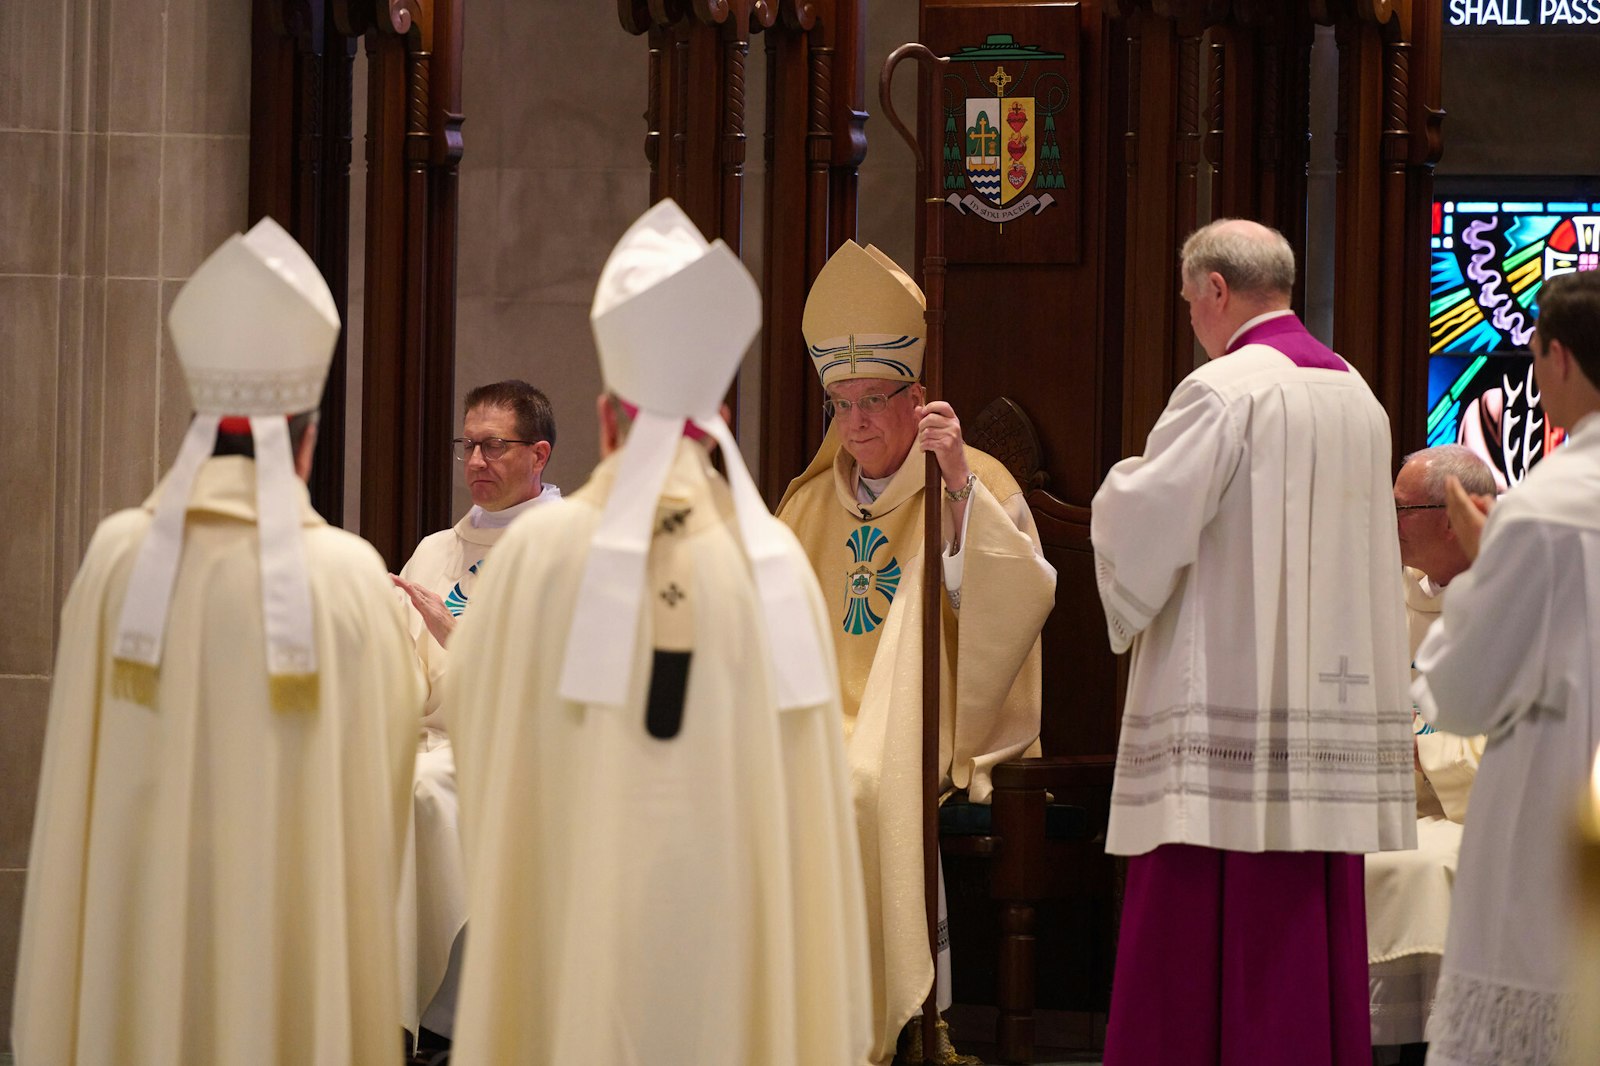 Bishop Gerard W. Battersby takes his seat on his cathedra for the first time as bishop of the Diocese of La Crosse, Wis., during his installation Mass on May 20 at the Cathedral of St. Joseph the Workman. (Photos courtesy of the Diocese of La Crosse)